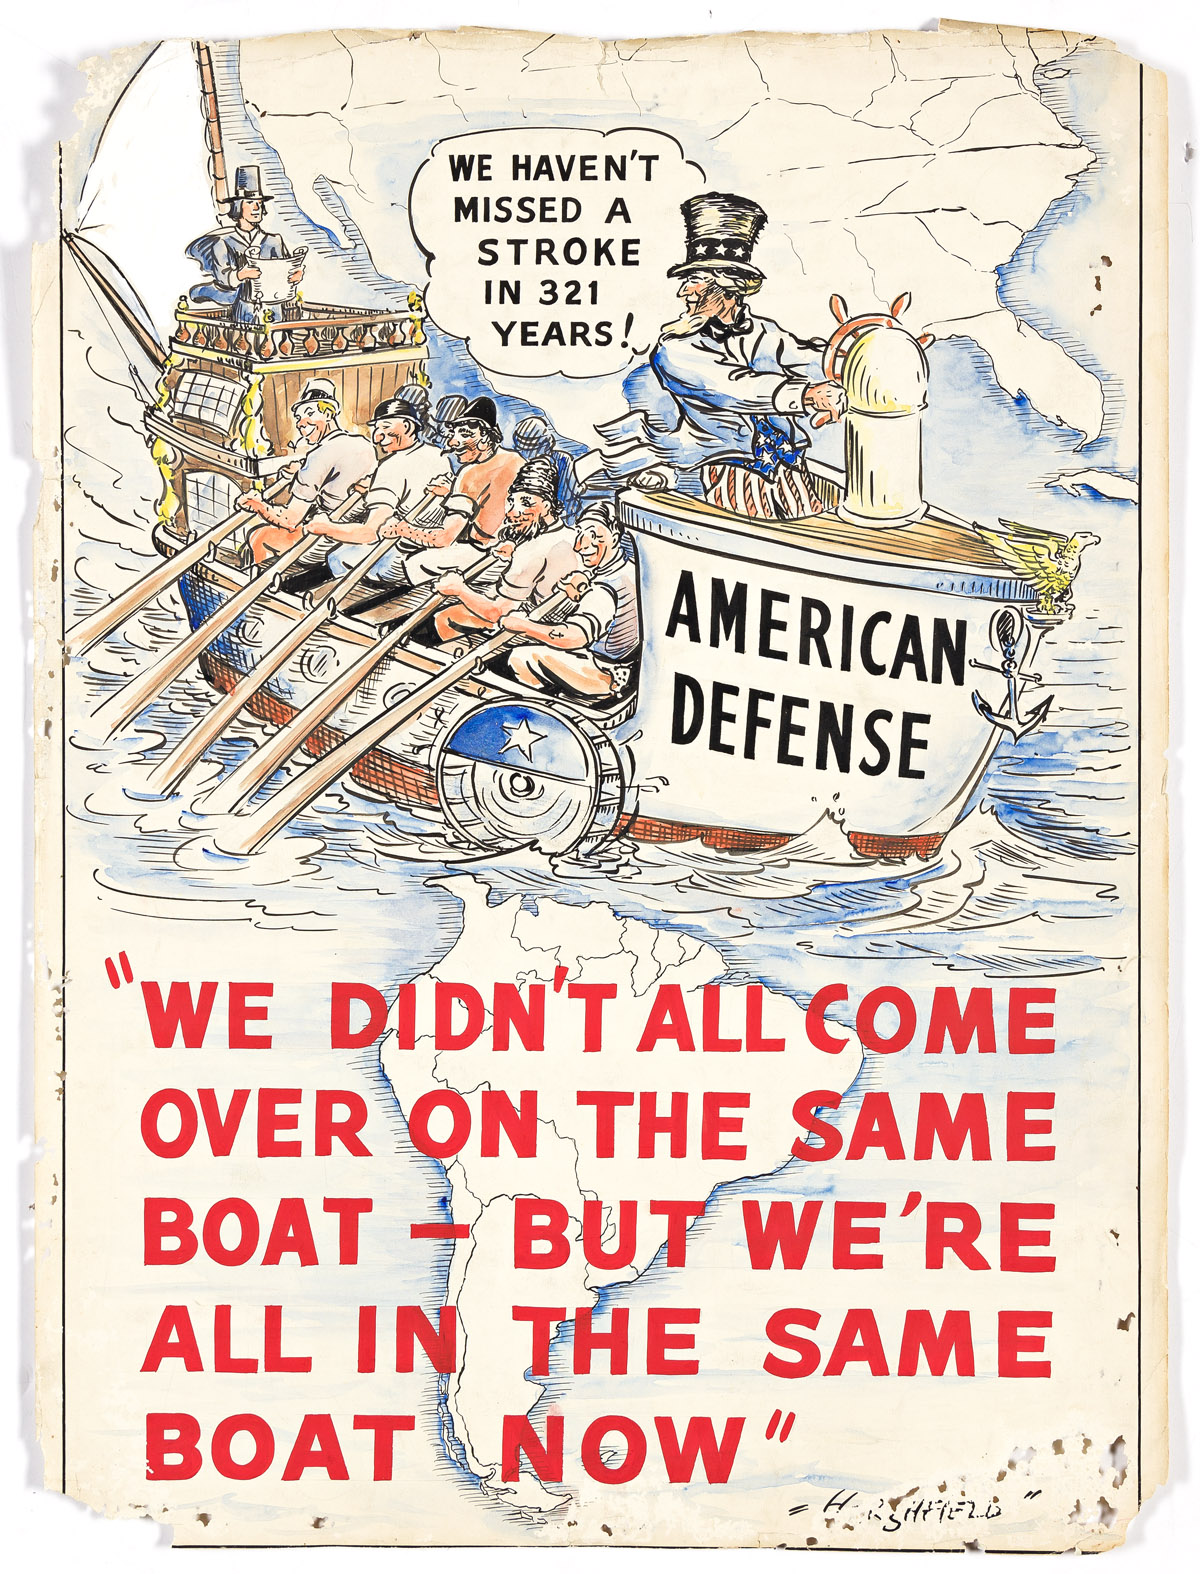 HARRY HERSHFIELD (1885-1974) Group of 4 poster designs commissioned by The National Brewing Company. (WORLD WAR II / PATRIOTISM)